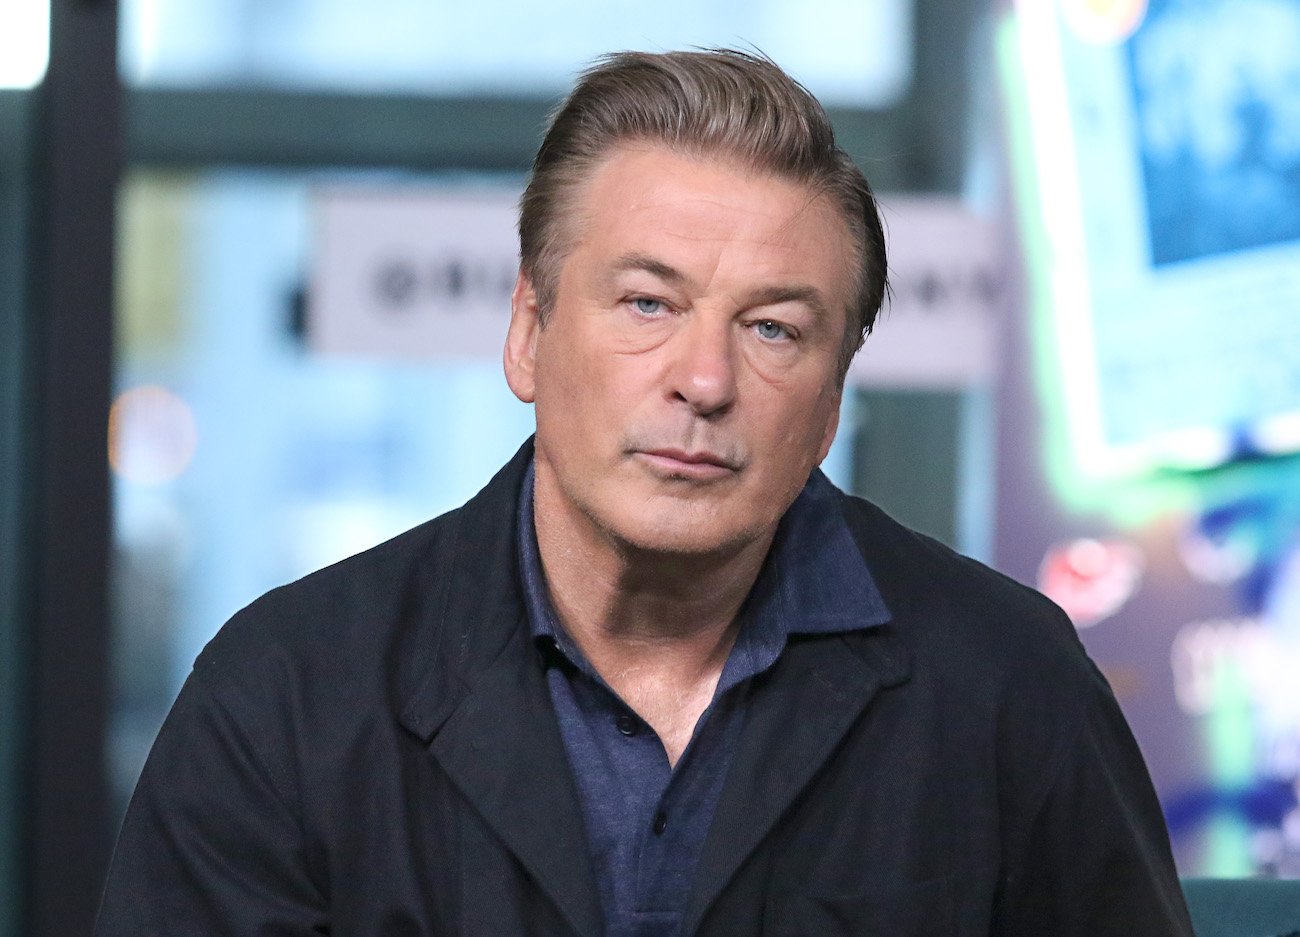 Alec Baldwin Sued by Halyna Hutchins’ Family After ‘Rust’ Shooting Accident